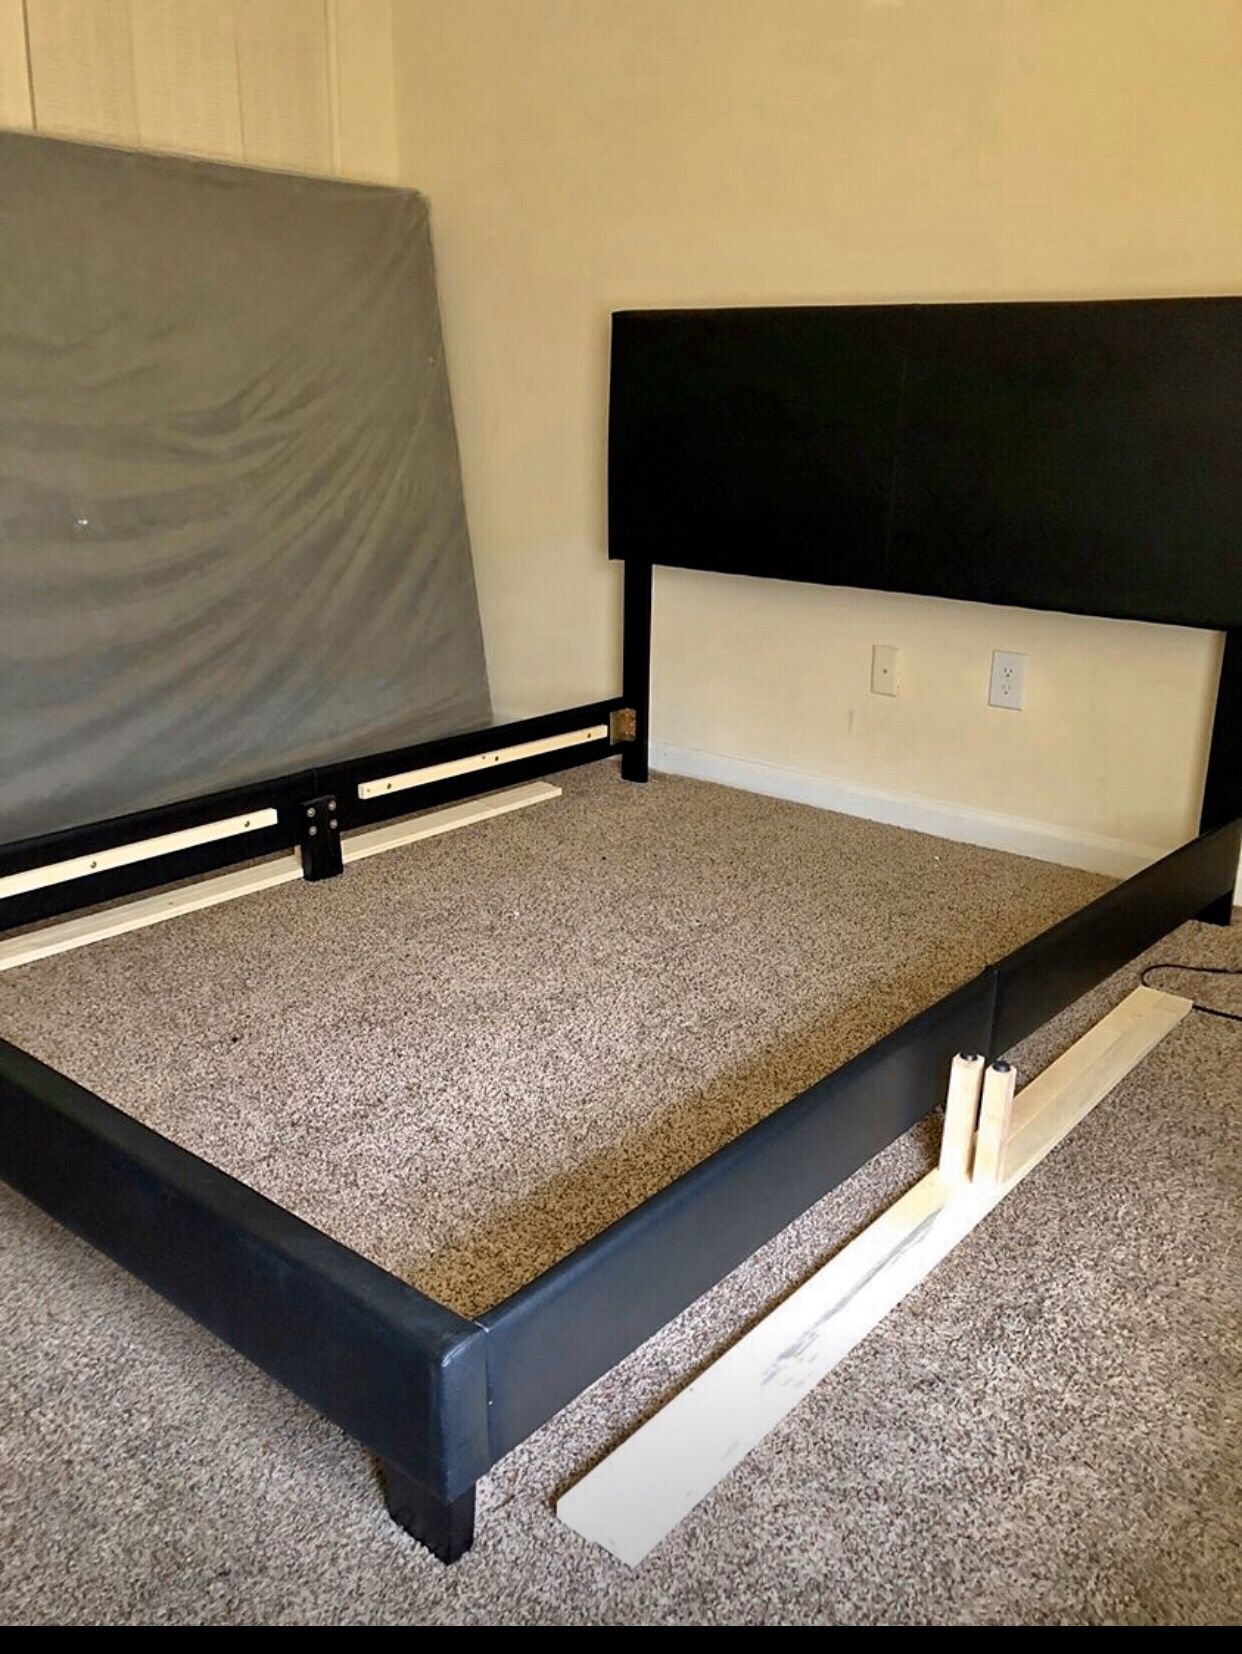 Brand new queen size bed frame